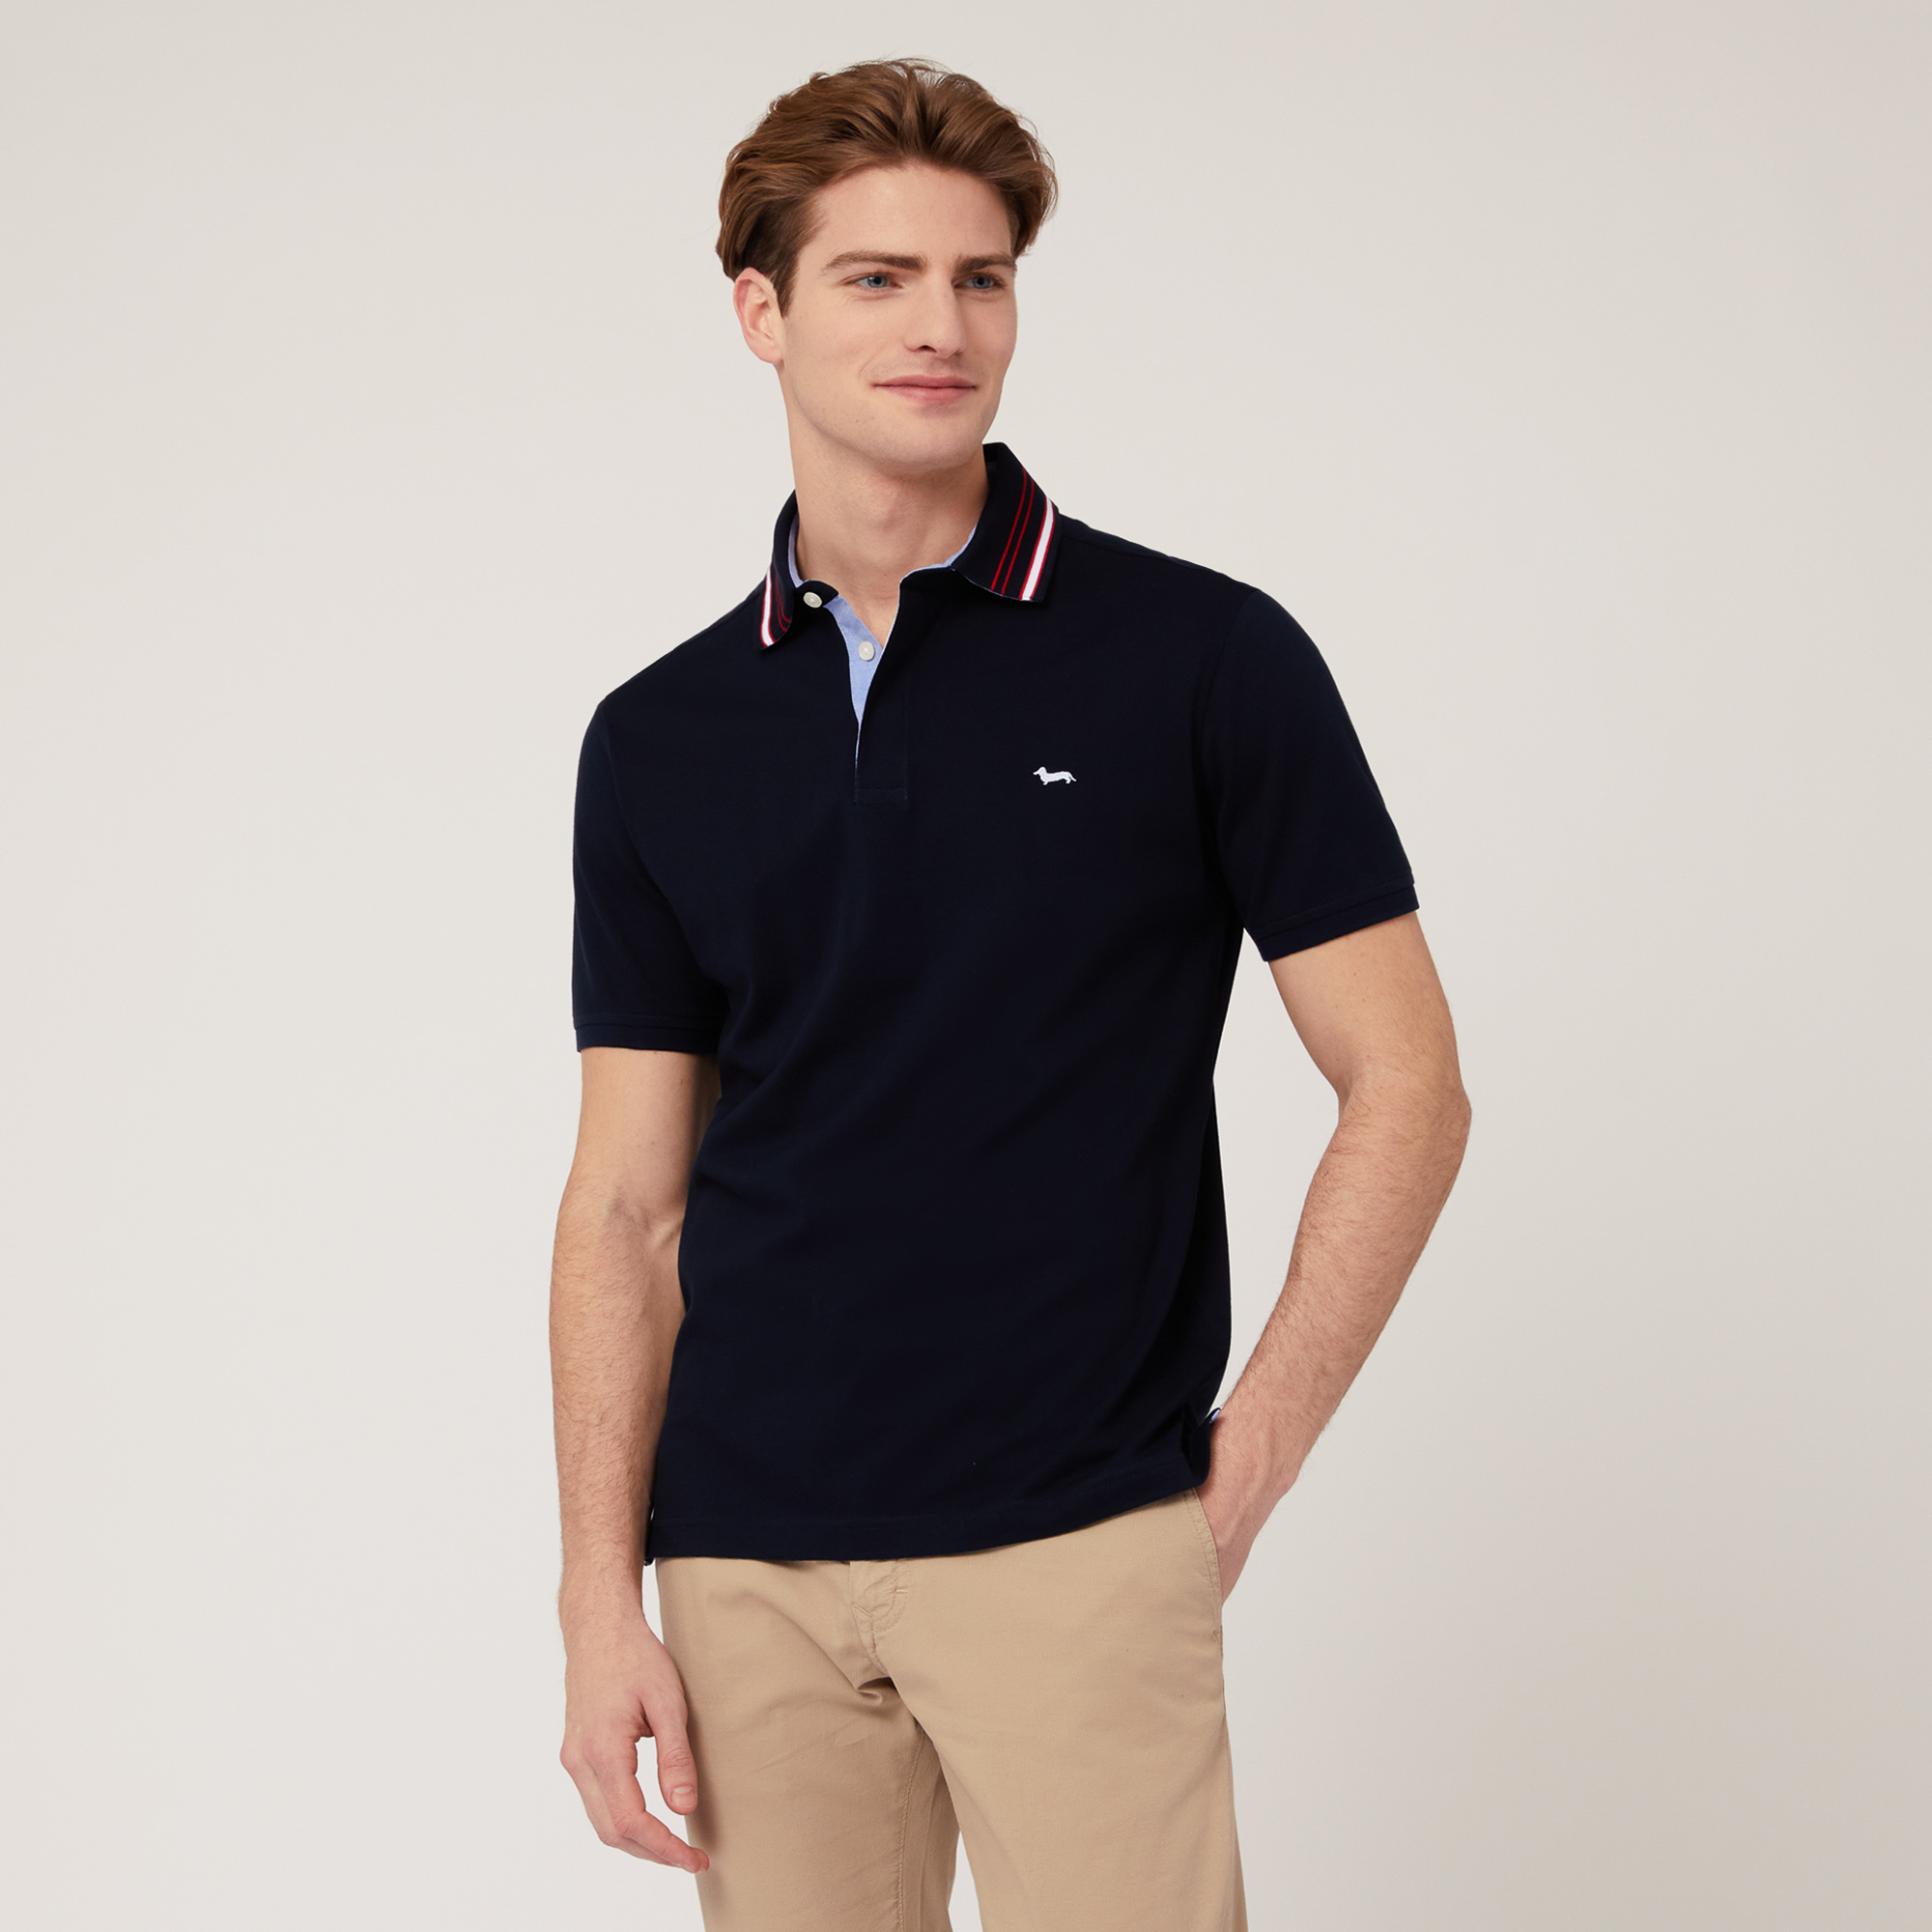 Vietri Polo Shirt with Ribbed Collar, Blue, large